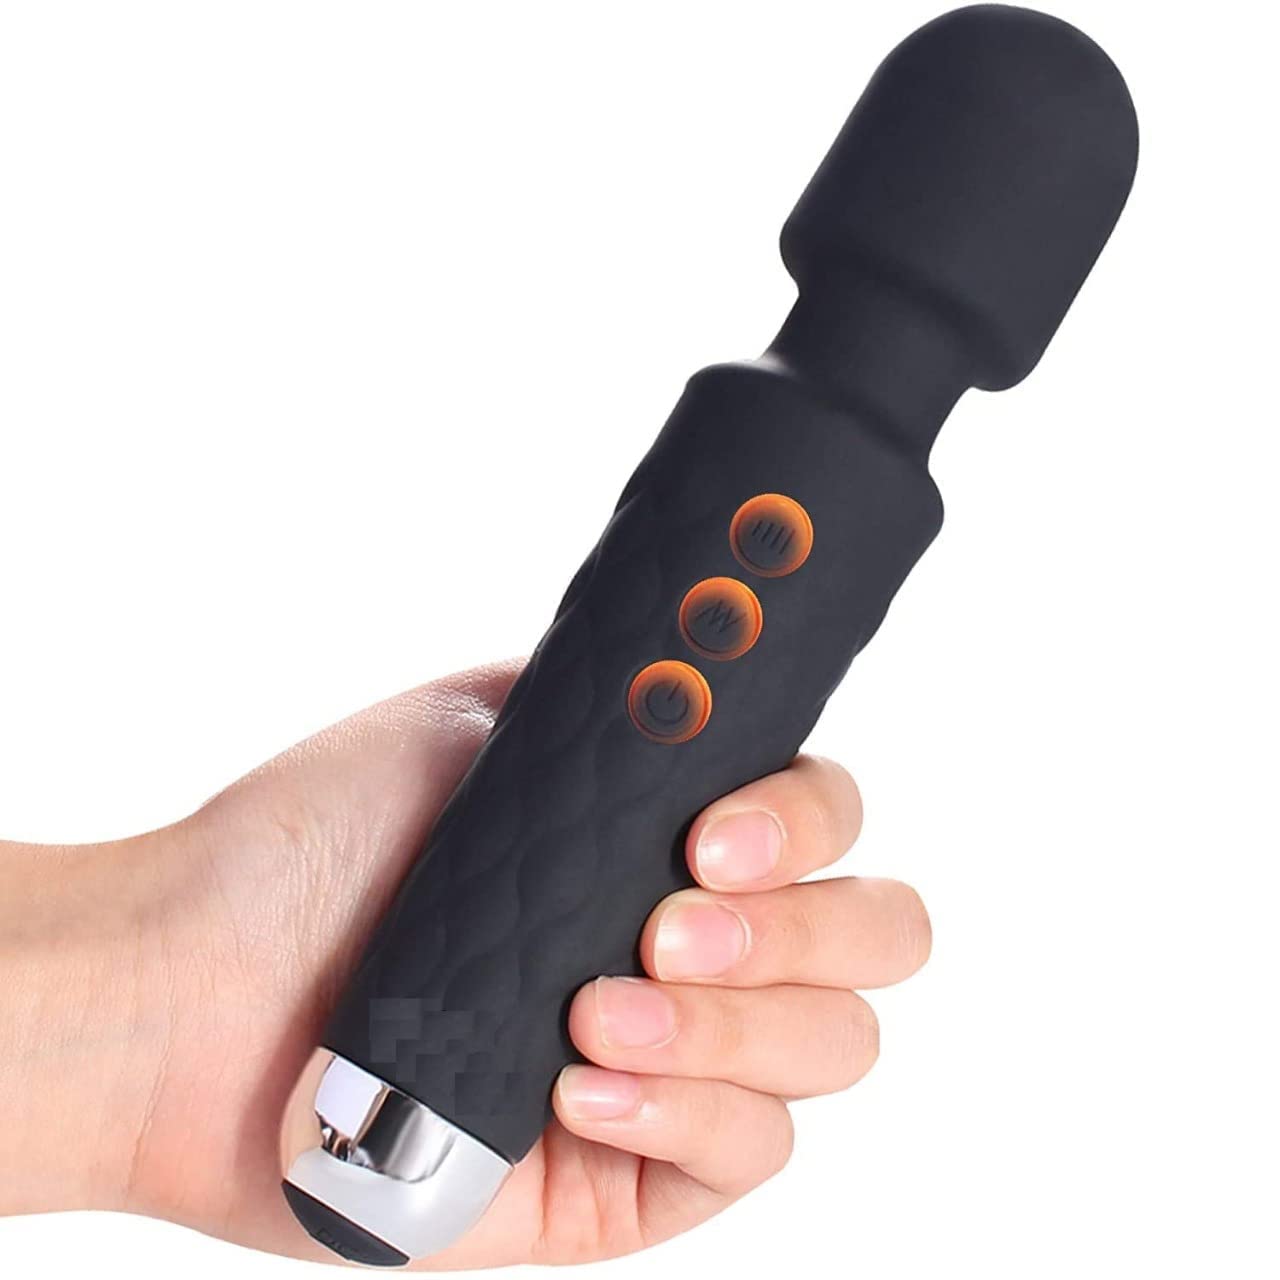 Cordless Body Massager - Battery Powered Rechargeable Personal Body Massager For Pain Relief Handheld Cordless Massager Machine Flexible Neck, Quite & Powerful Massager for Women & Men